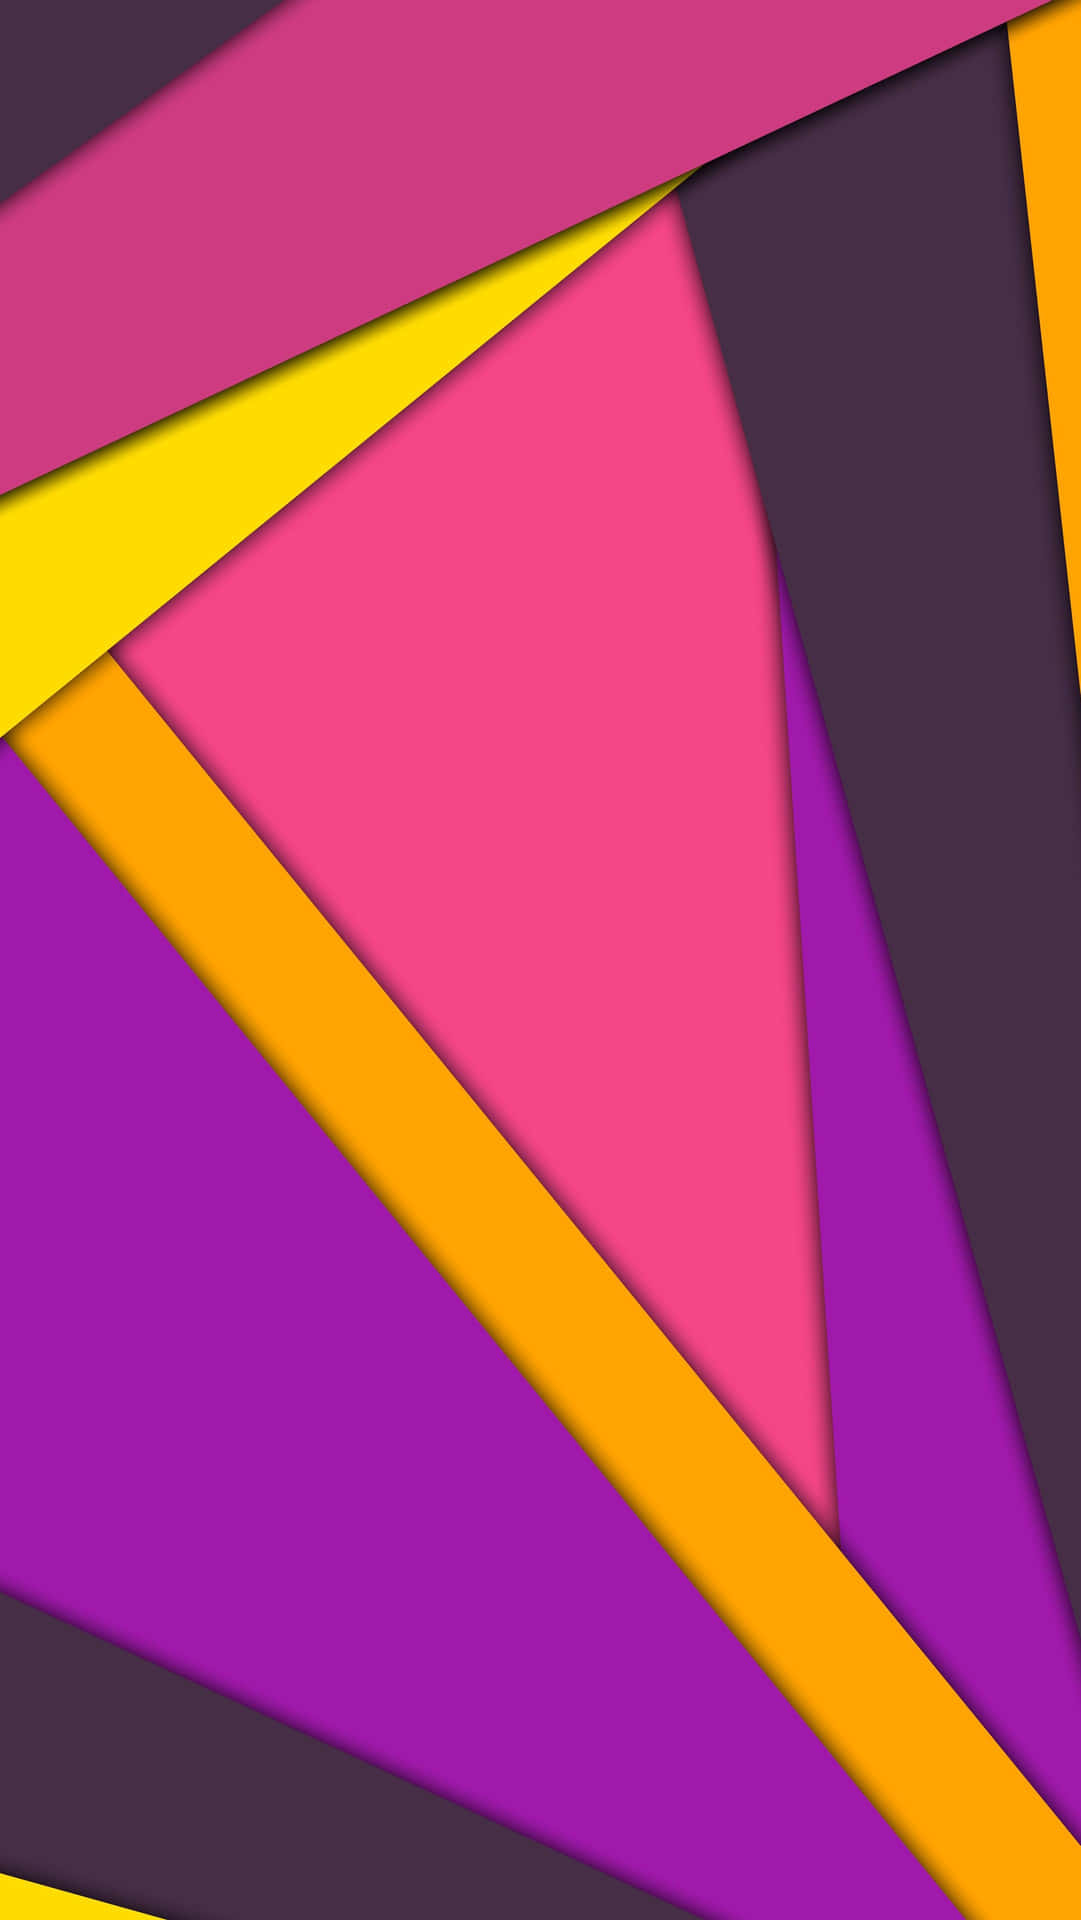 Captivating Material Design Artwork for Android